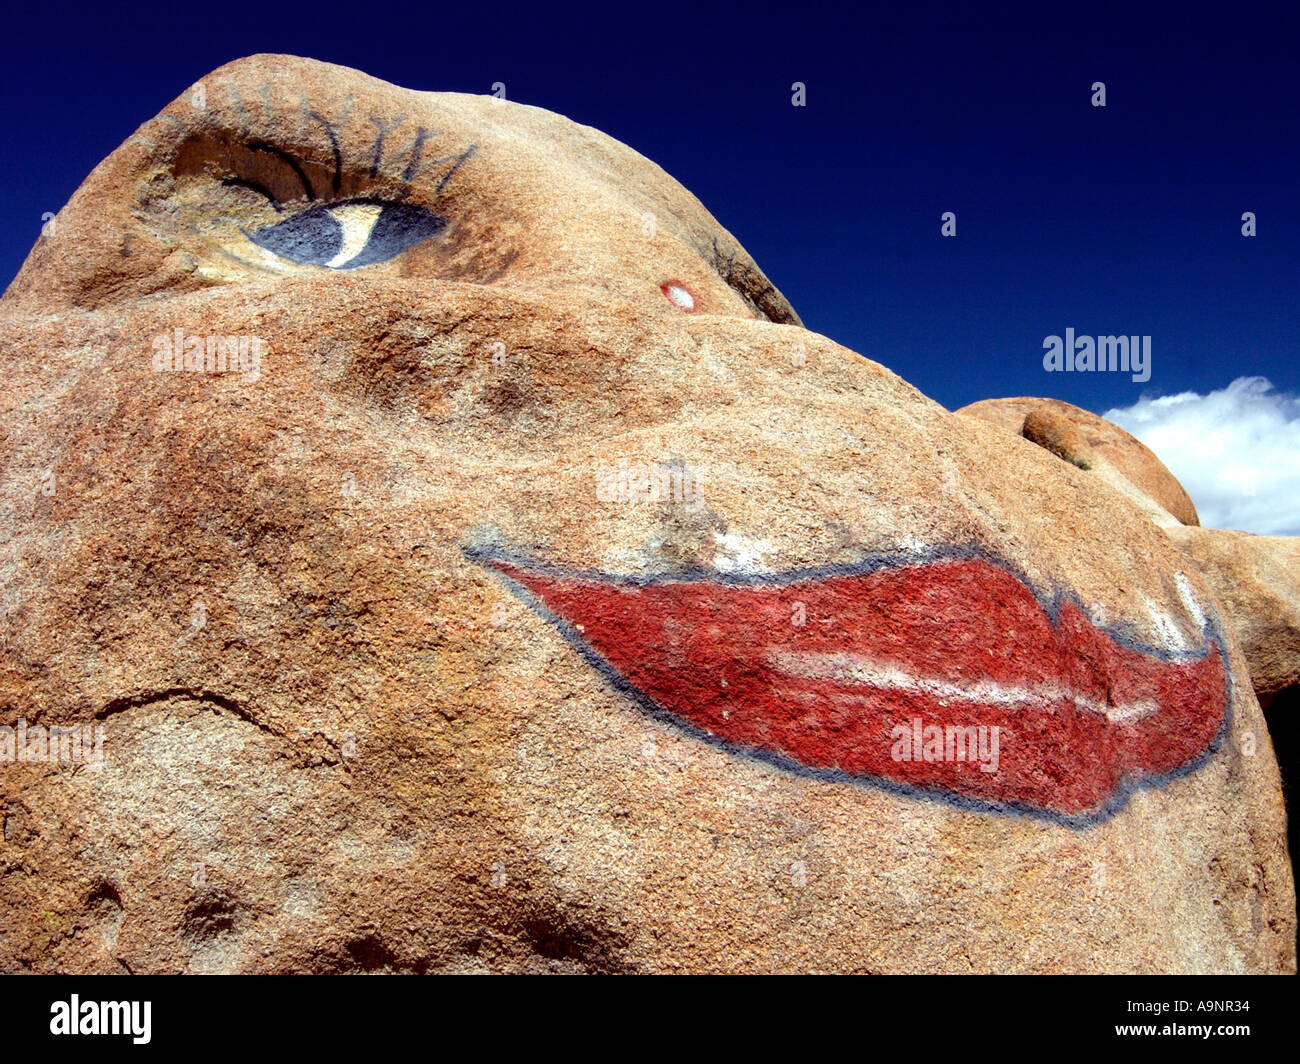 Decorated/Painted rock in Alabama Hills California Stock Photo